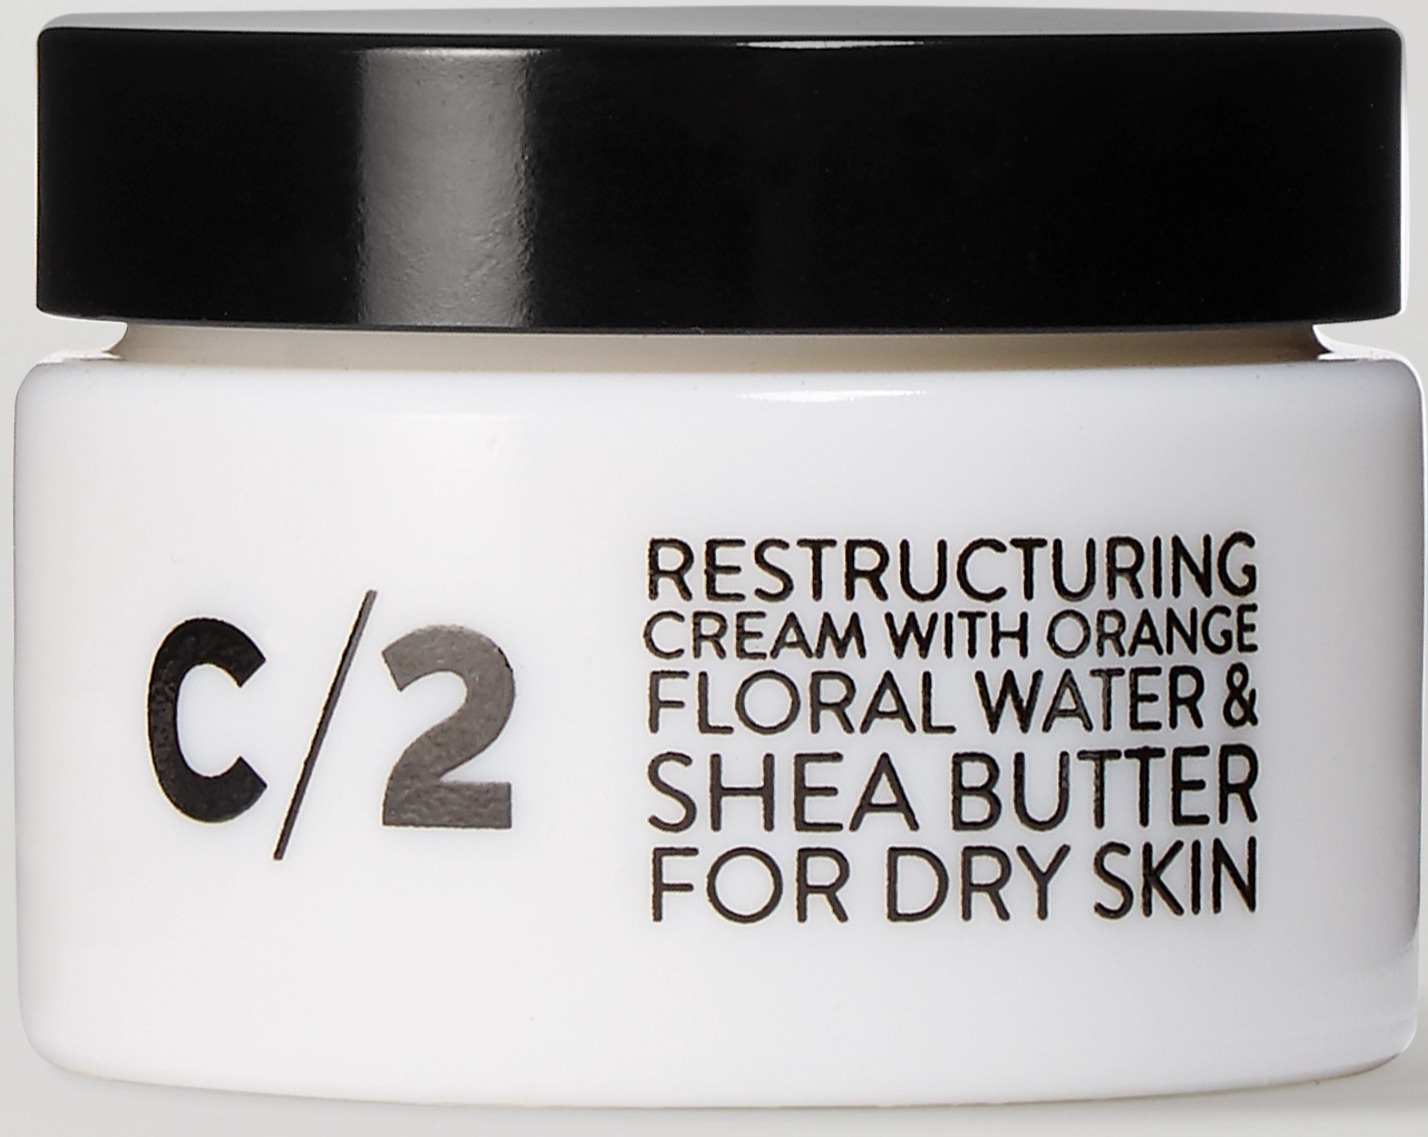 COSMYDOR C/2 Restructuring Cream With Orange Floral Water & Shea Butter